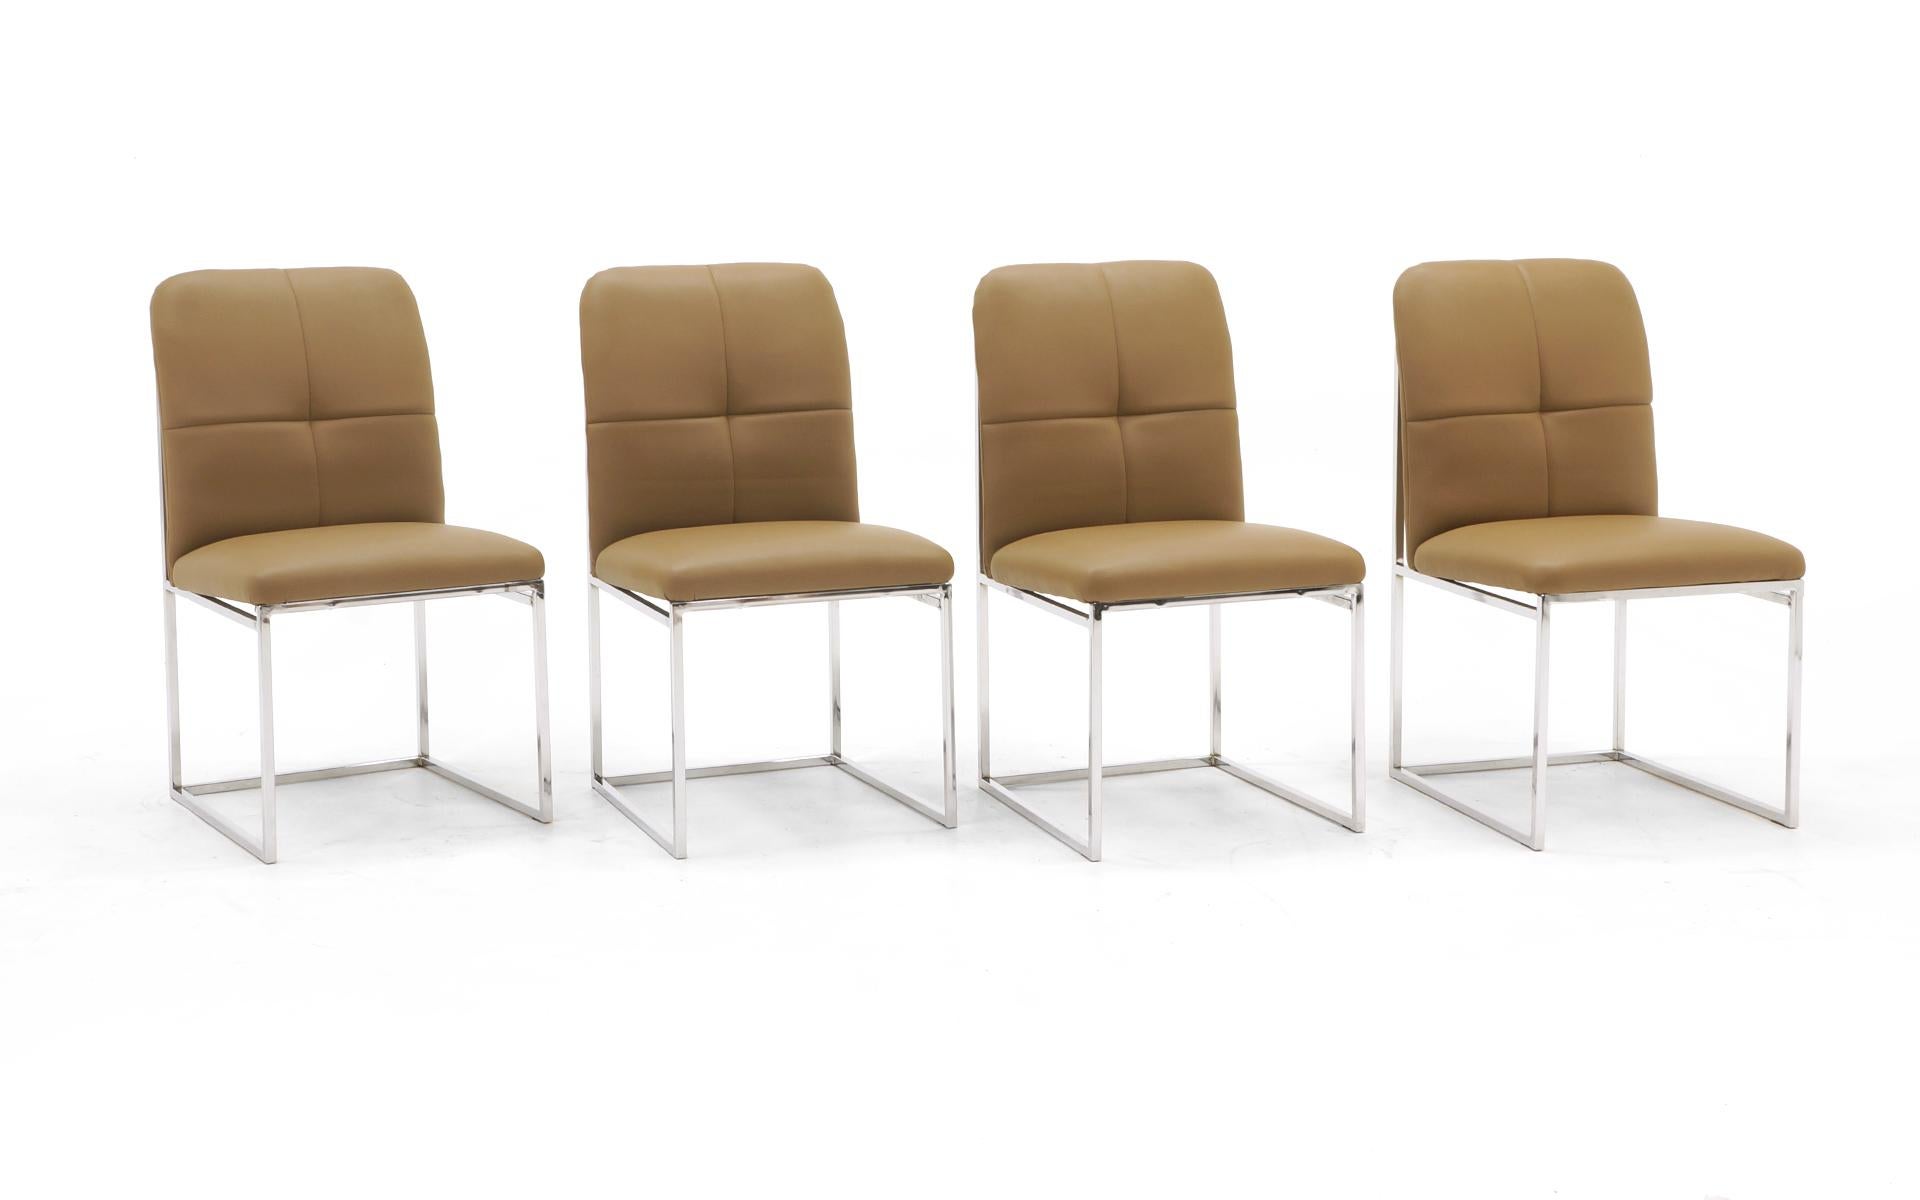 Set of four Milo Baughman dining chairs reupholstered in a tan leather. Beautiful set.